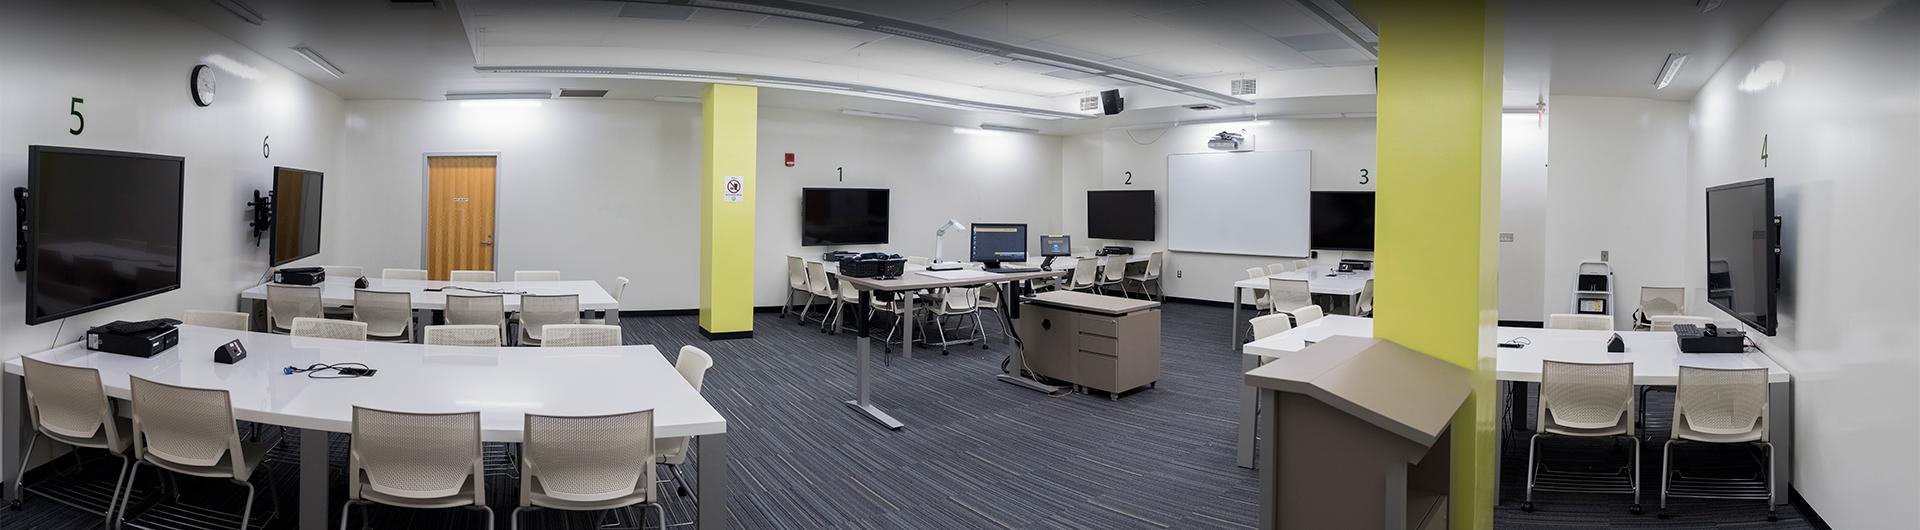 AS 235 Active Learning Classroom